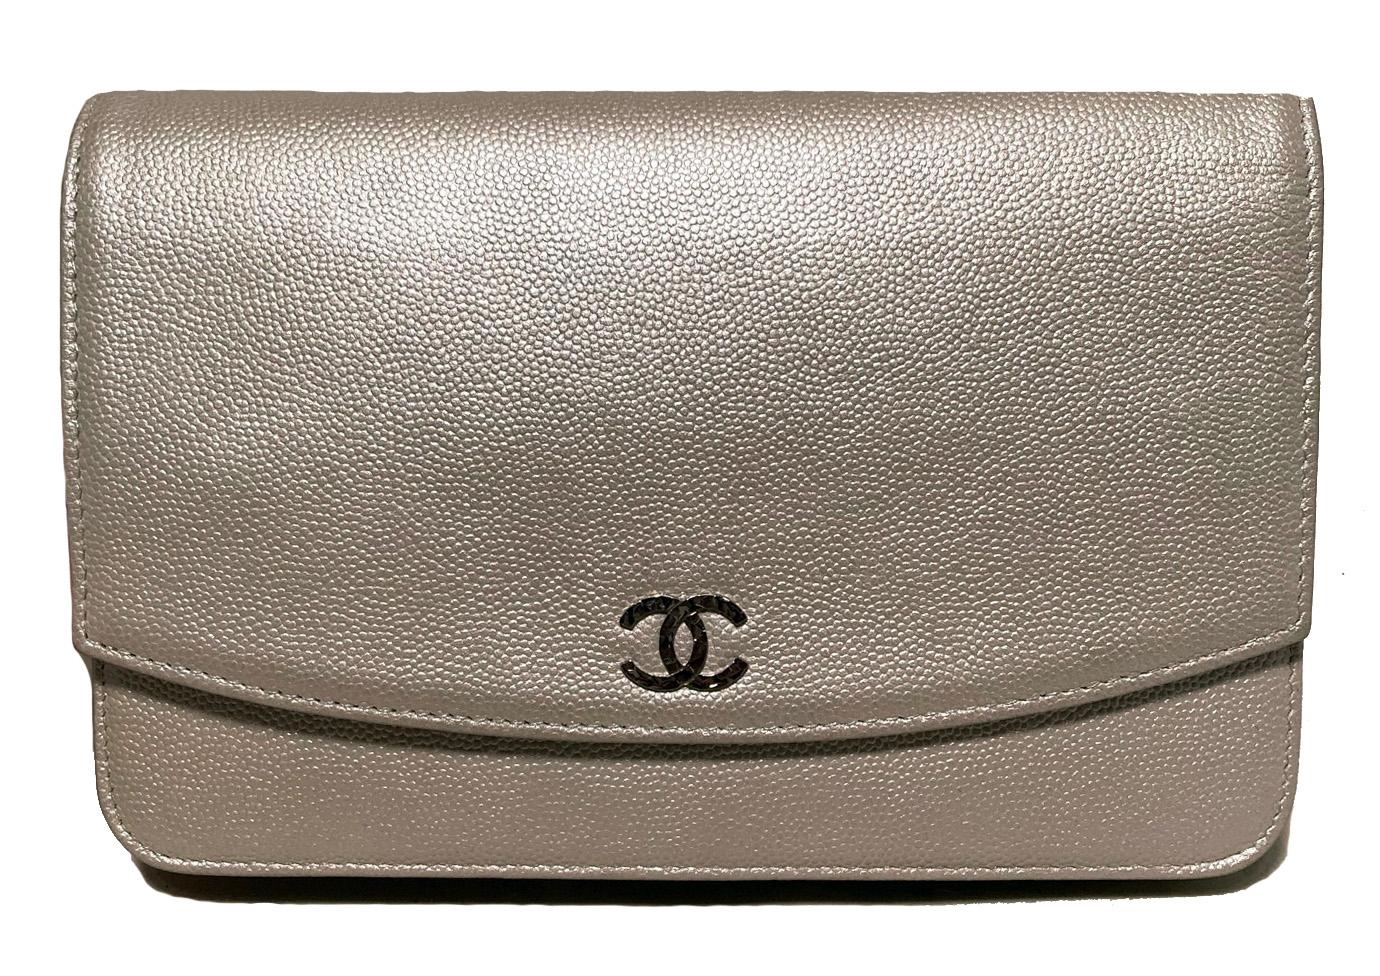 Chanel Pearl Caviar Leather WOC Wallet on a Chain in excellent condition. Iridescent pearl caviar leather exterior trimmed with silver CC logo and woven leather and chain shoulder strap. Front snap closure opens to a pearl leather and grey nylon